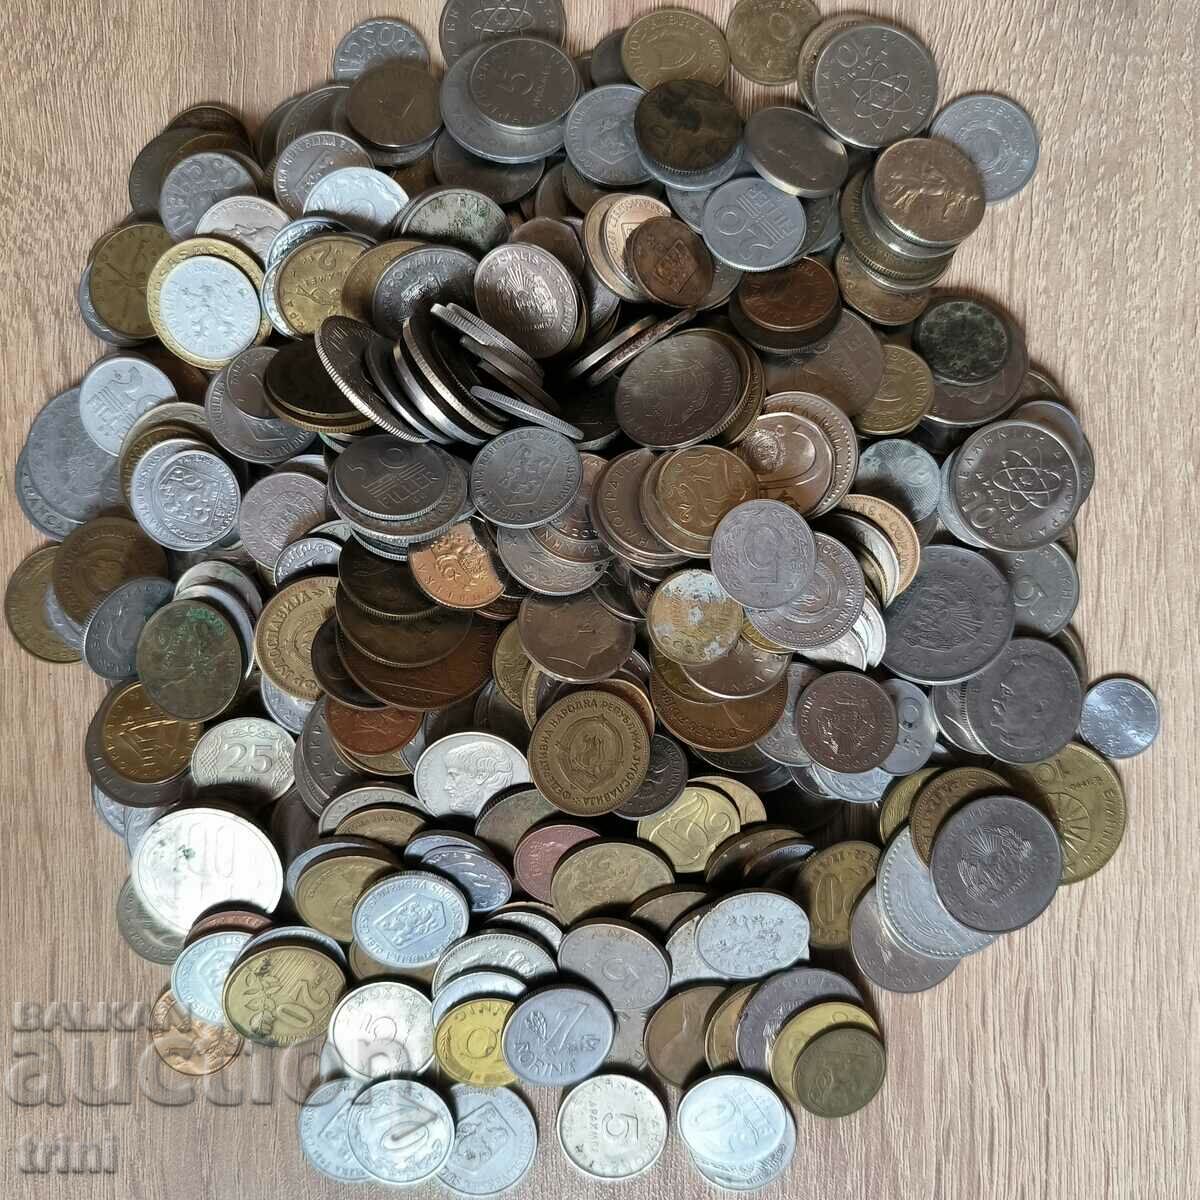 500 pieces of foreign coins mainly Europe